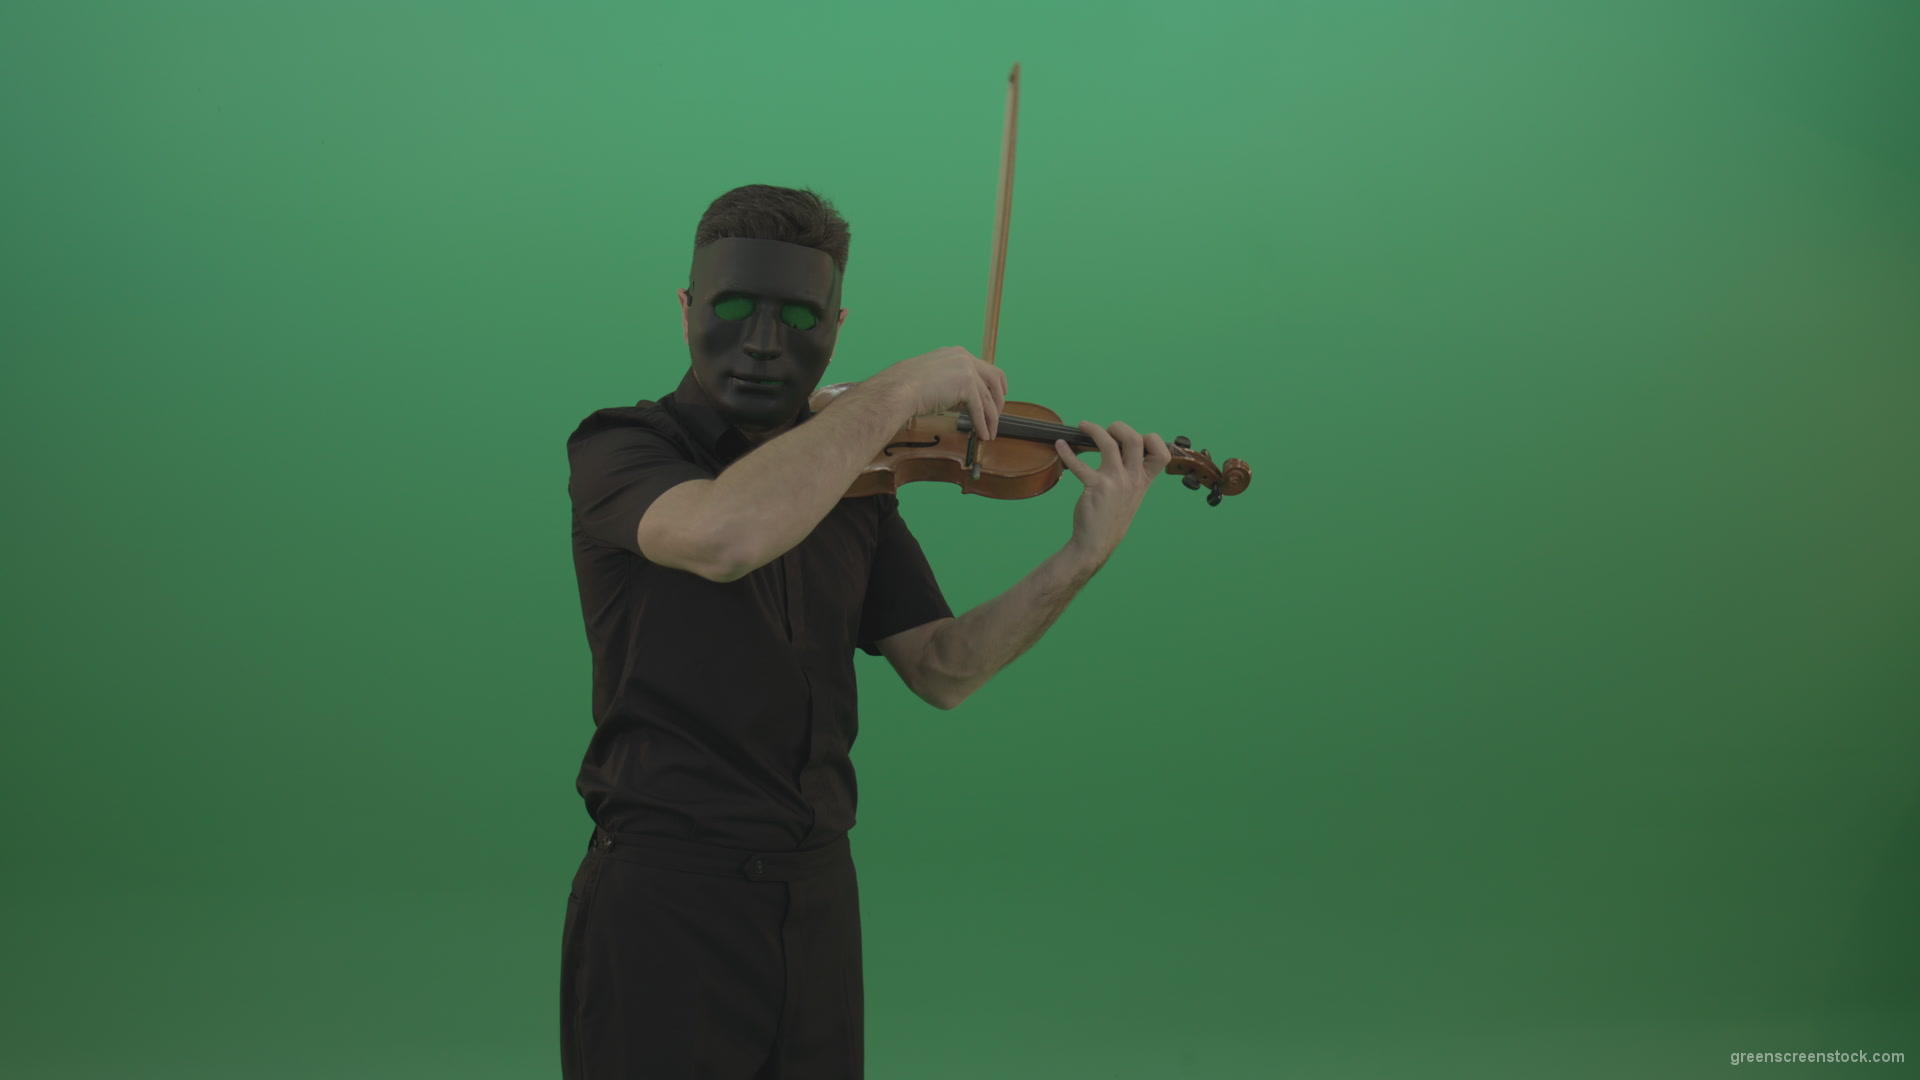 Man-in-black-wear-and-mask-play-violin-fiddle-strings-gothic-dark-music-isolated-on-green-screen_005 Green Screen Stock